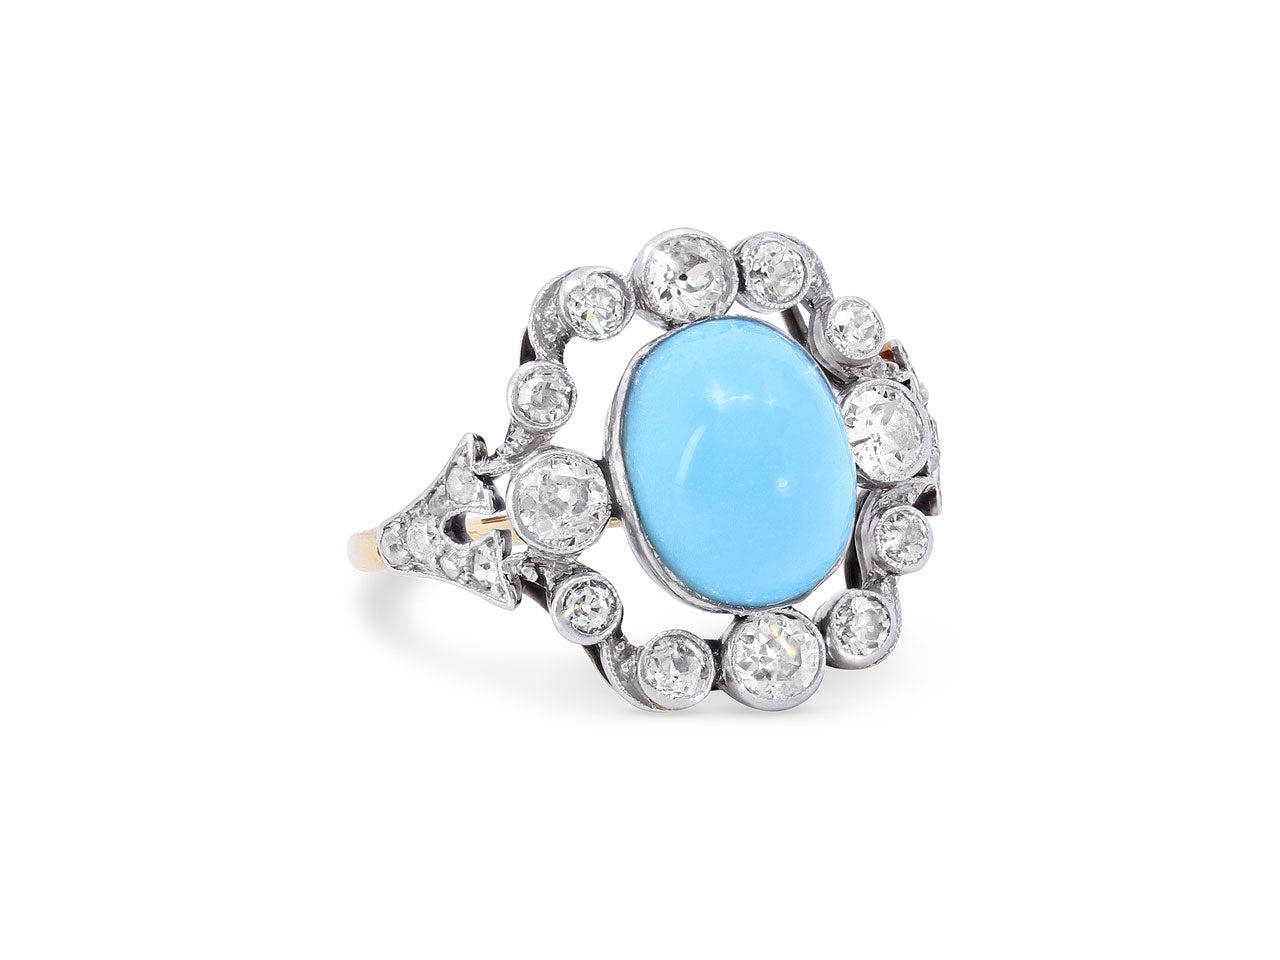 Antique Edwardian Turquoise and Diamond Ring in Platinum and 18K Gold